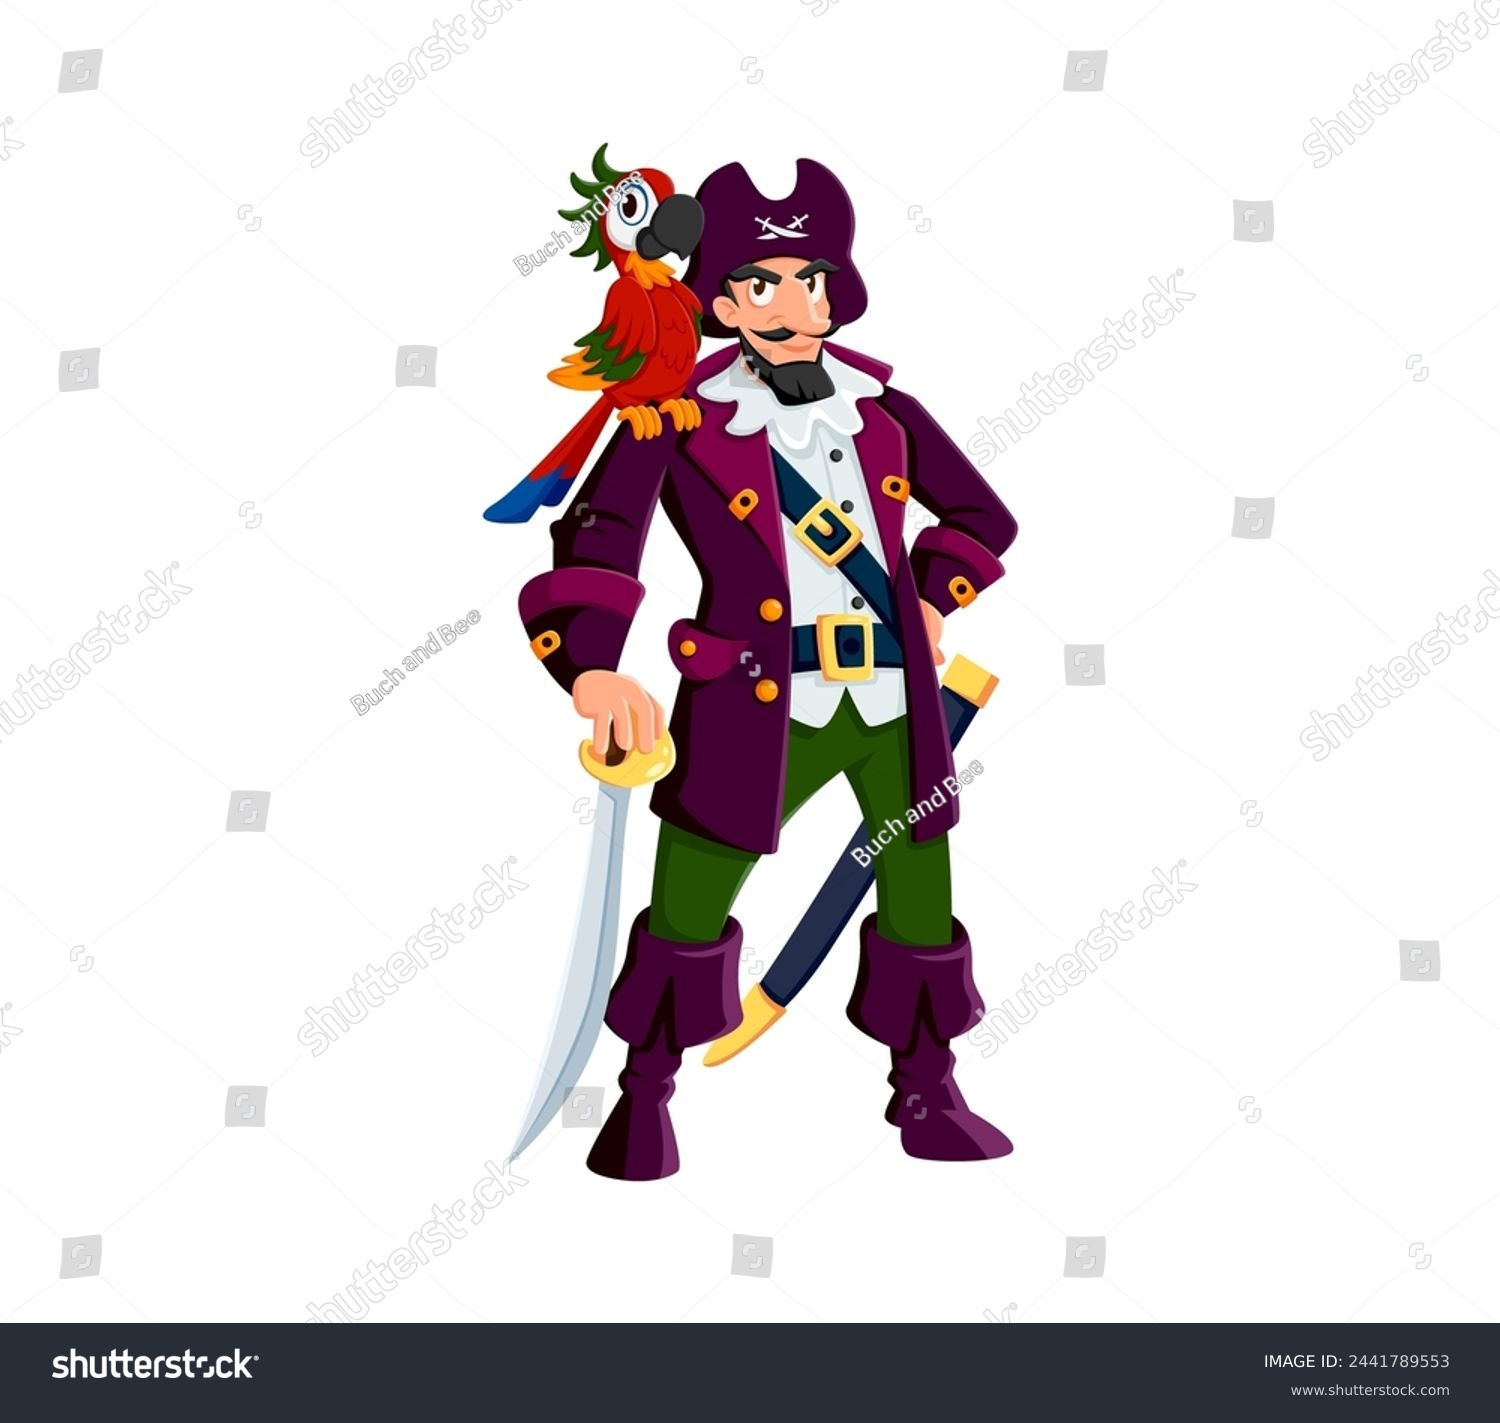 SVG of Cartoon pirate captain character with parrot. Isolated vector charismatic sea corsair or buccaneer personage in traditional hat and costume, confidently stands with colorful bird perched on shoulder svg